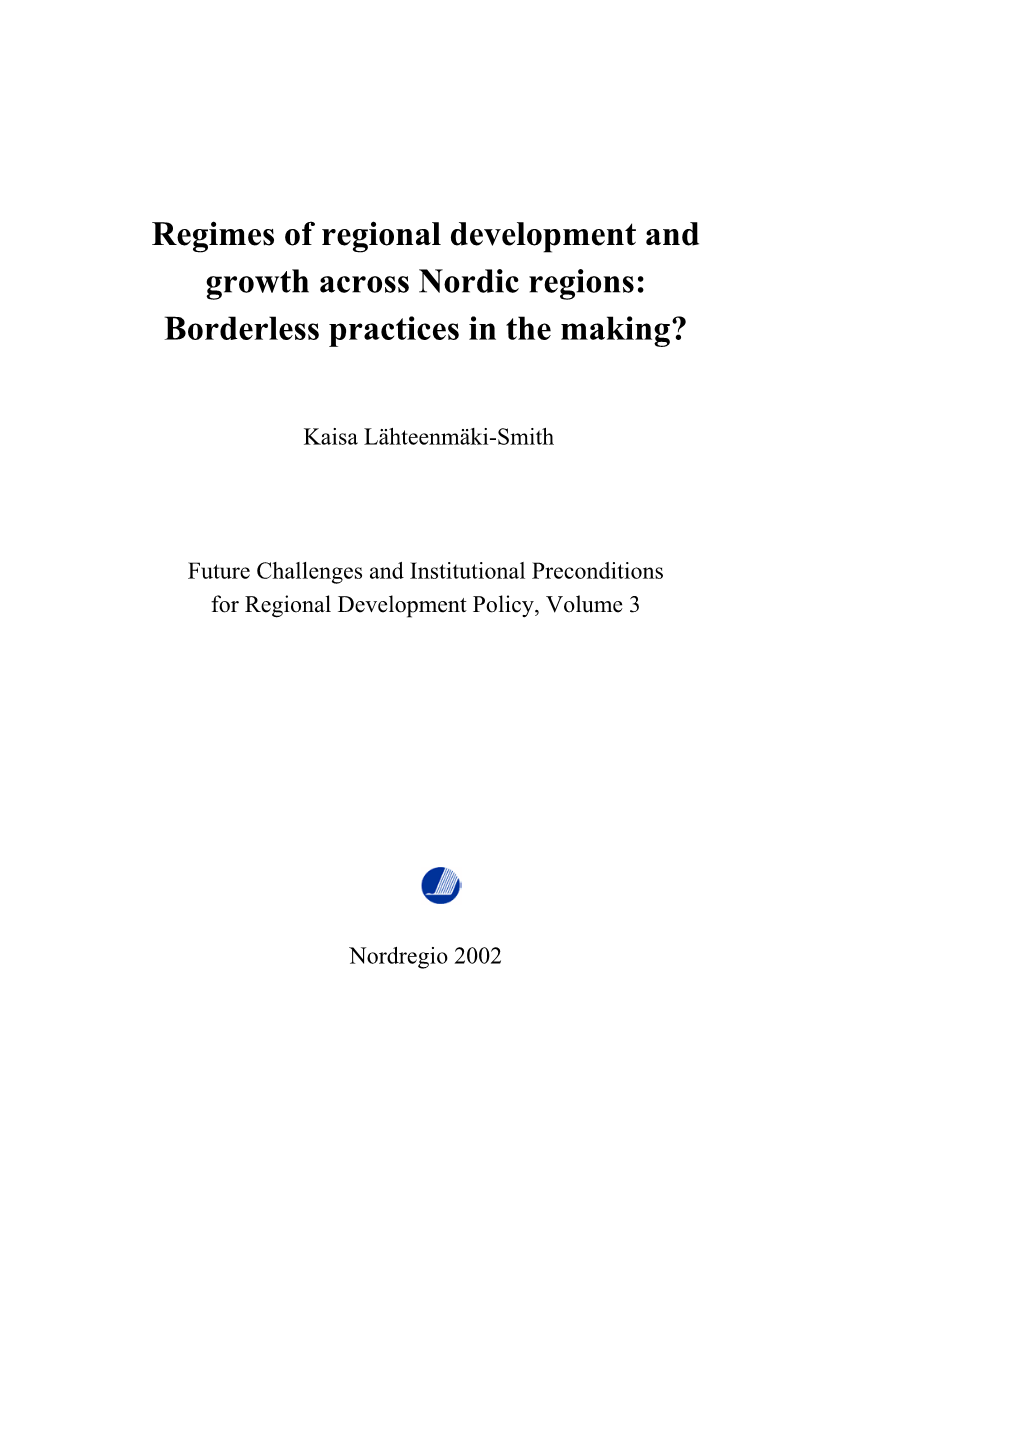 Regimes of Regional Development and Growth Across Nordic Regions: Borderless Practices in the Making?